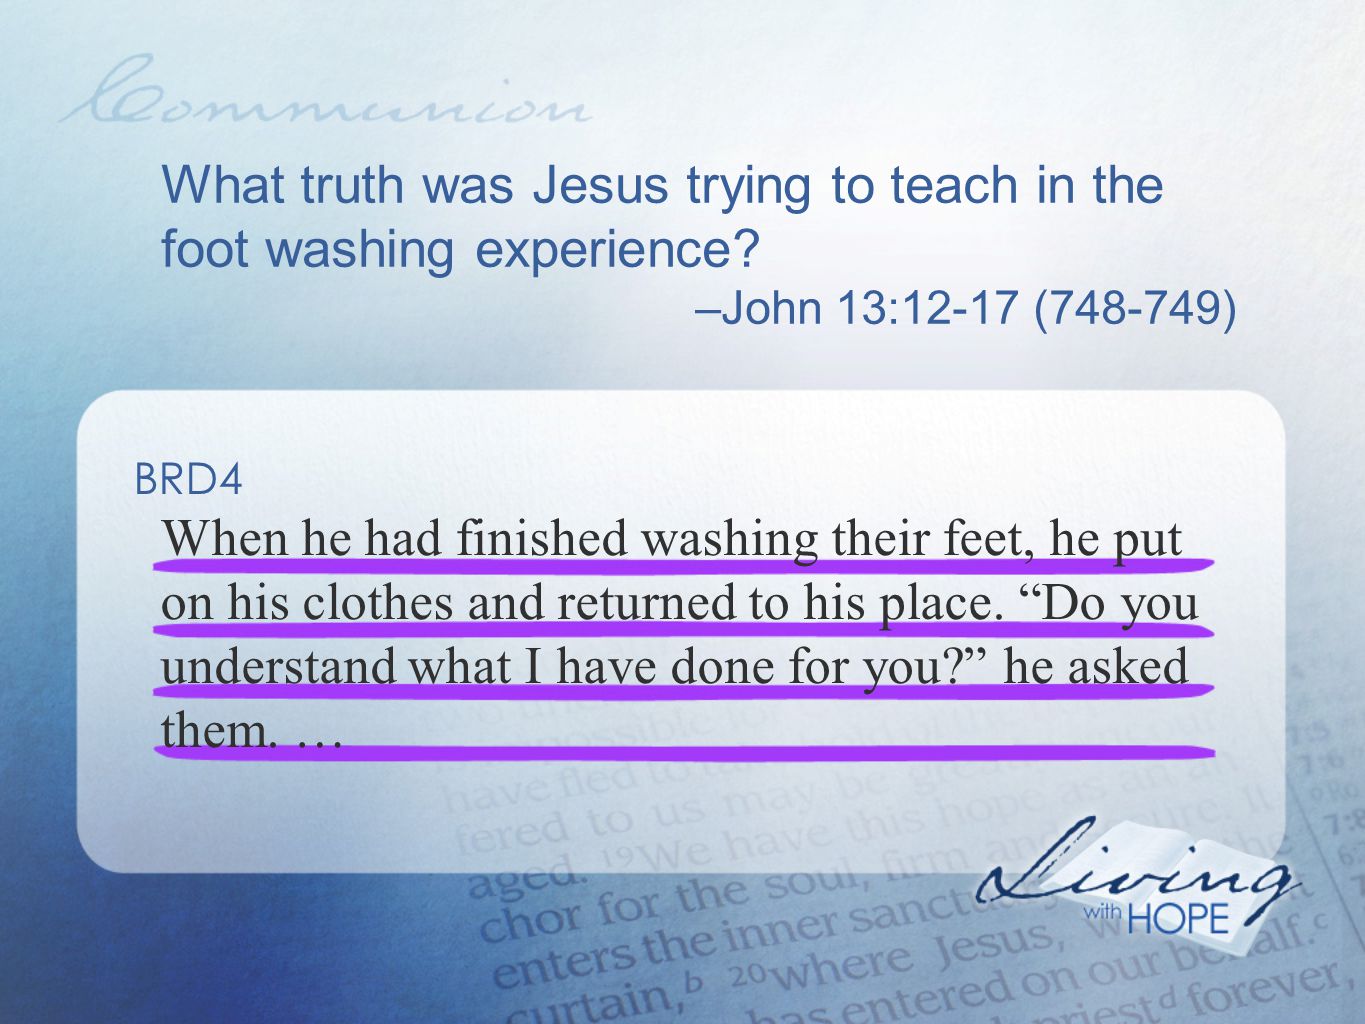 What truth was Jesus trying to teach in the foot washing experience